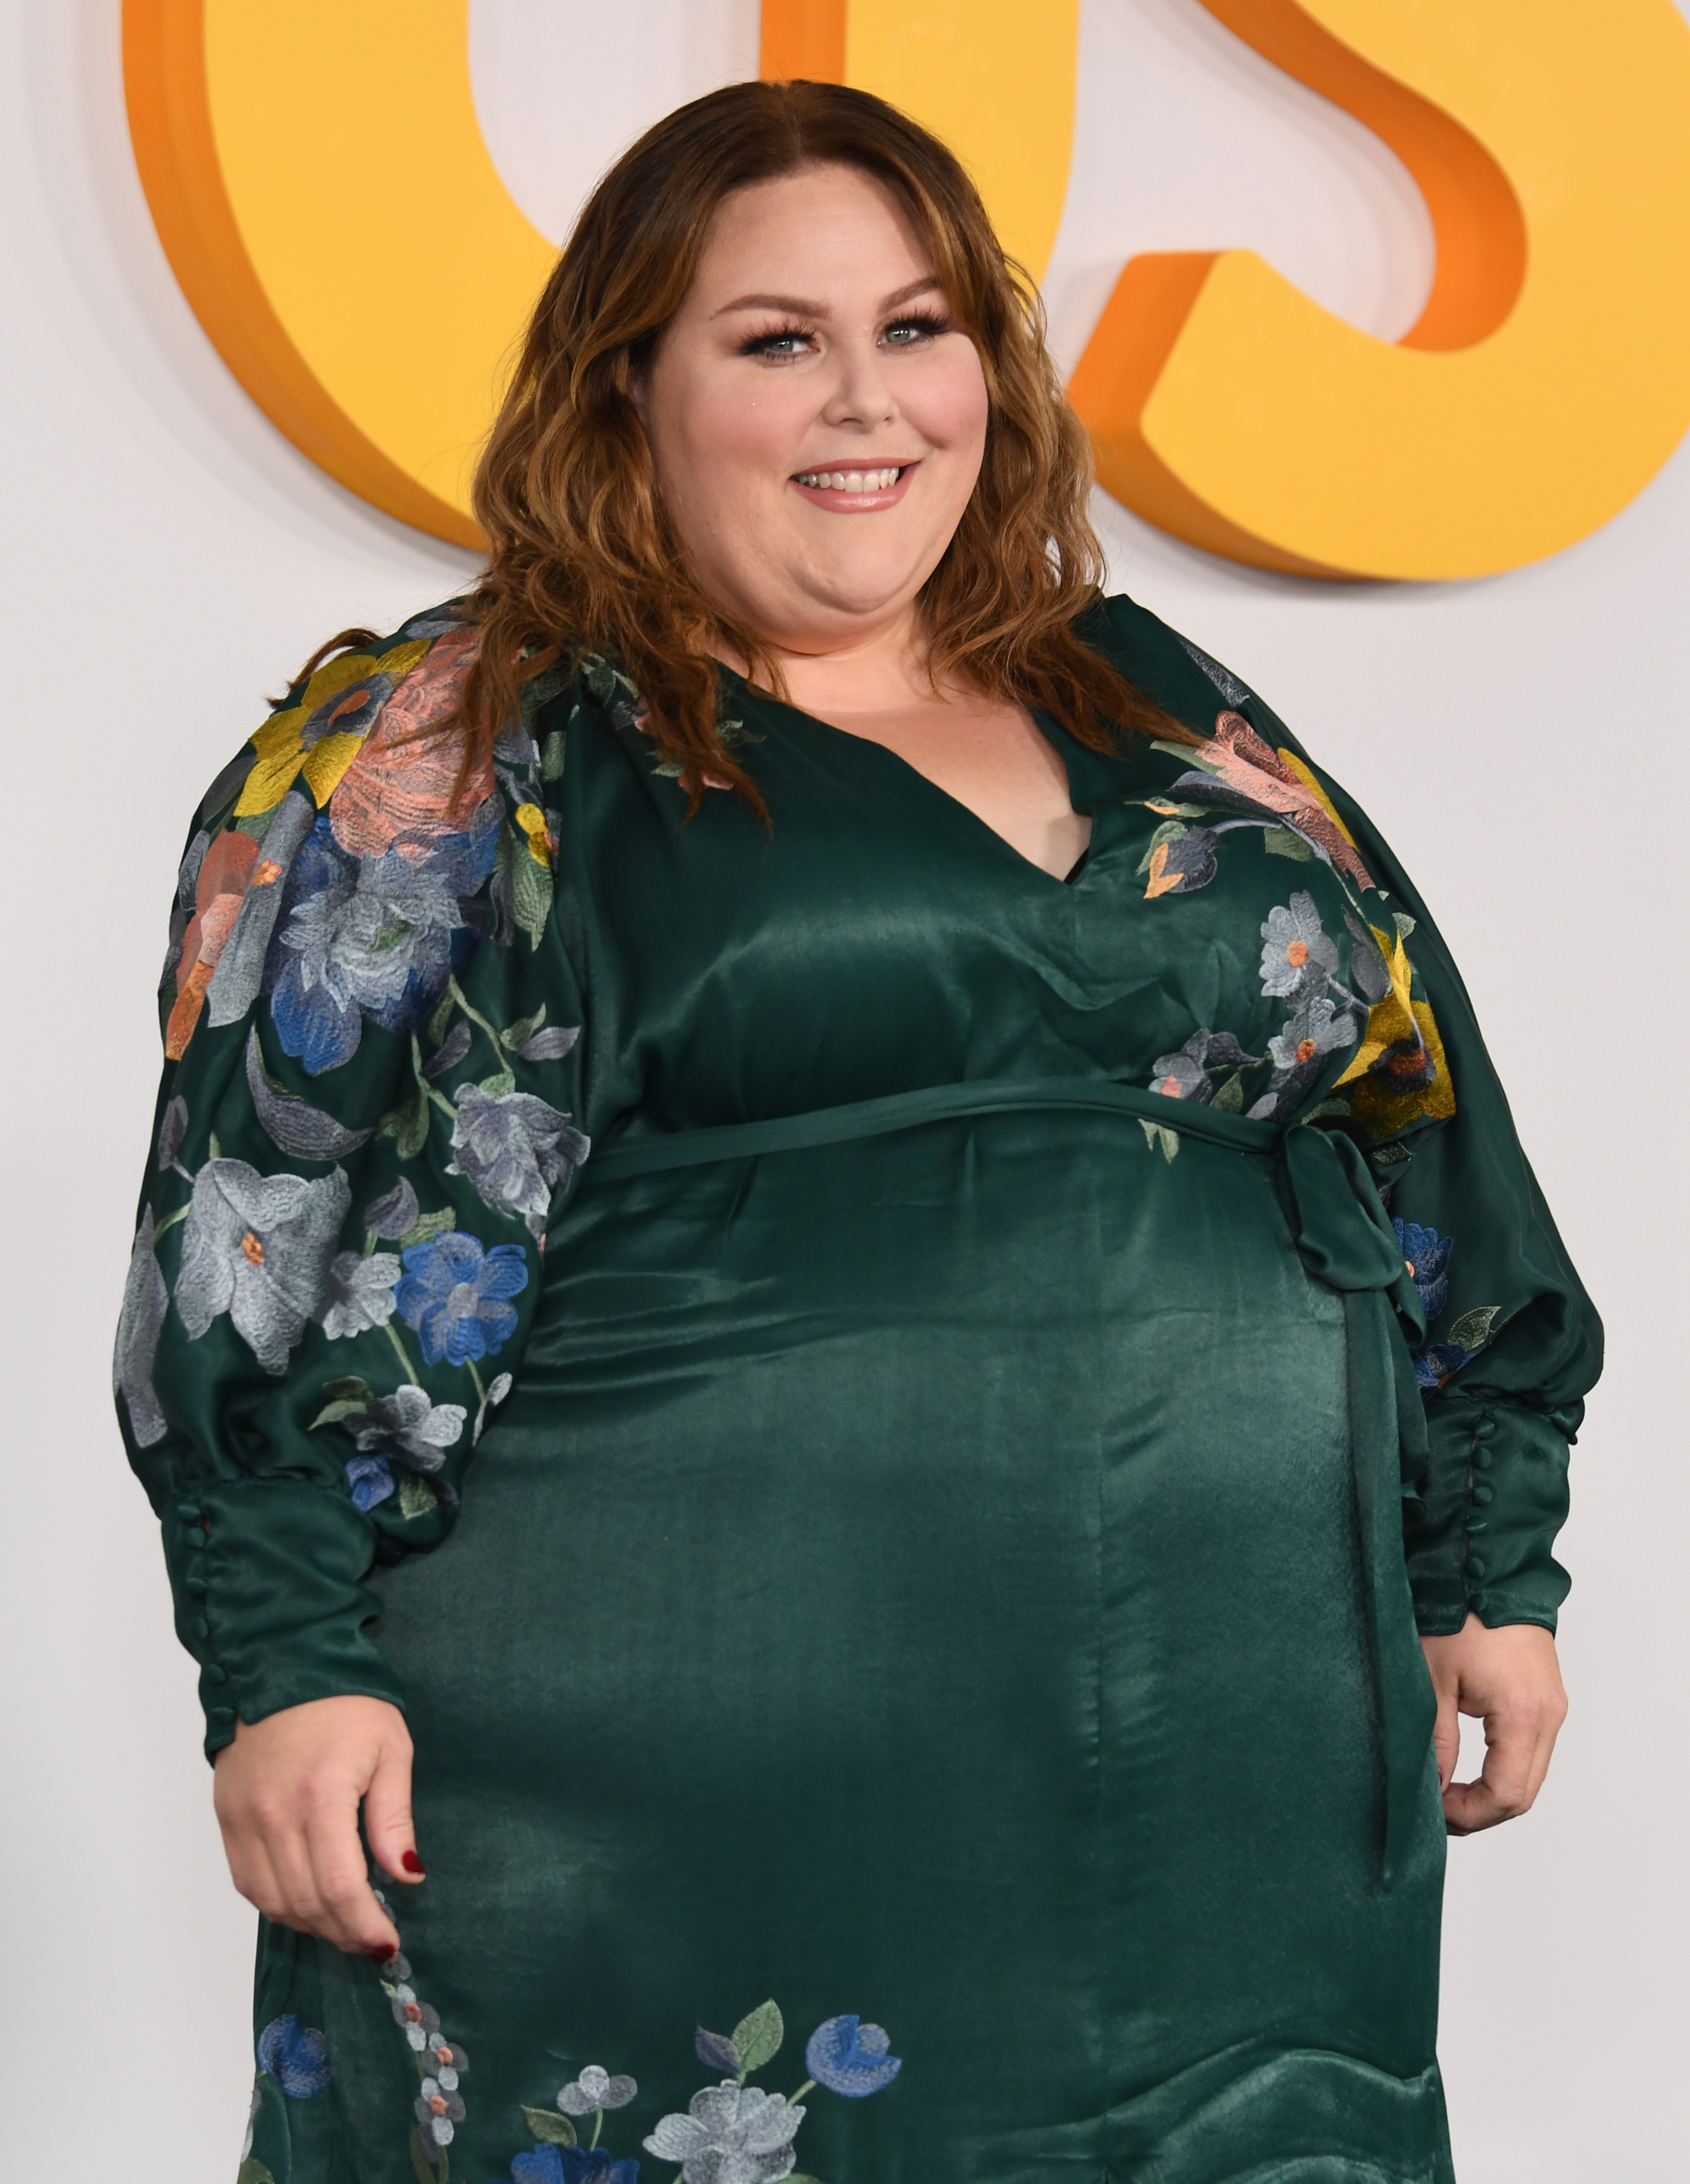 Chrissy Metz on the red carpet